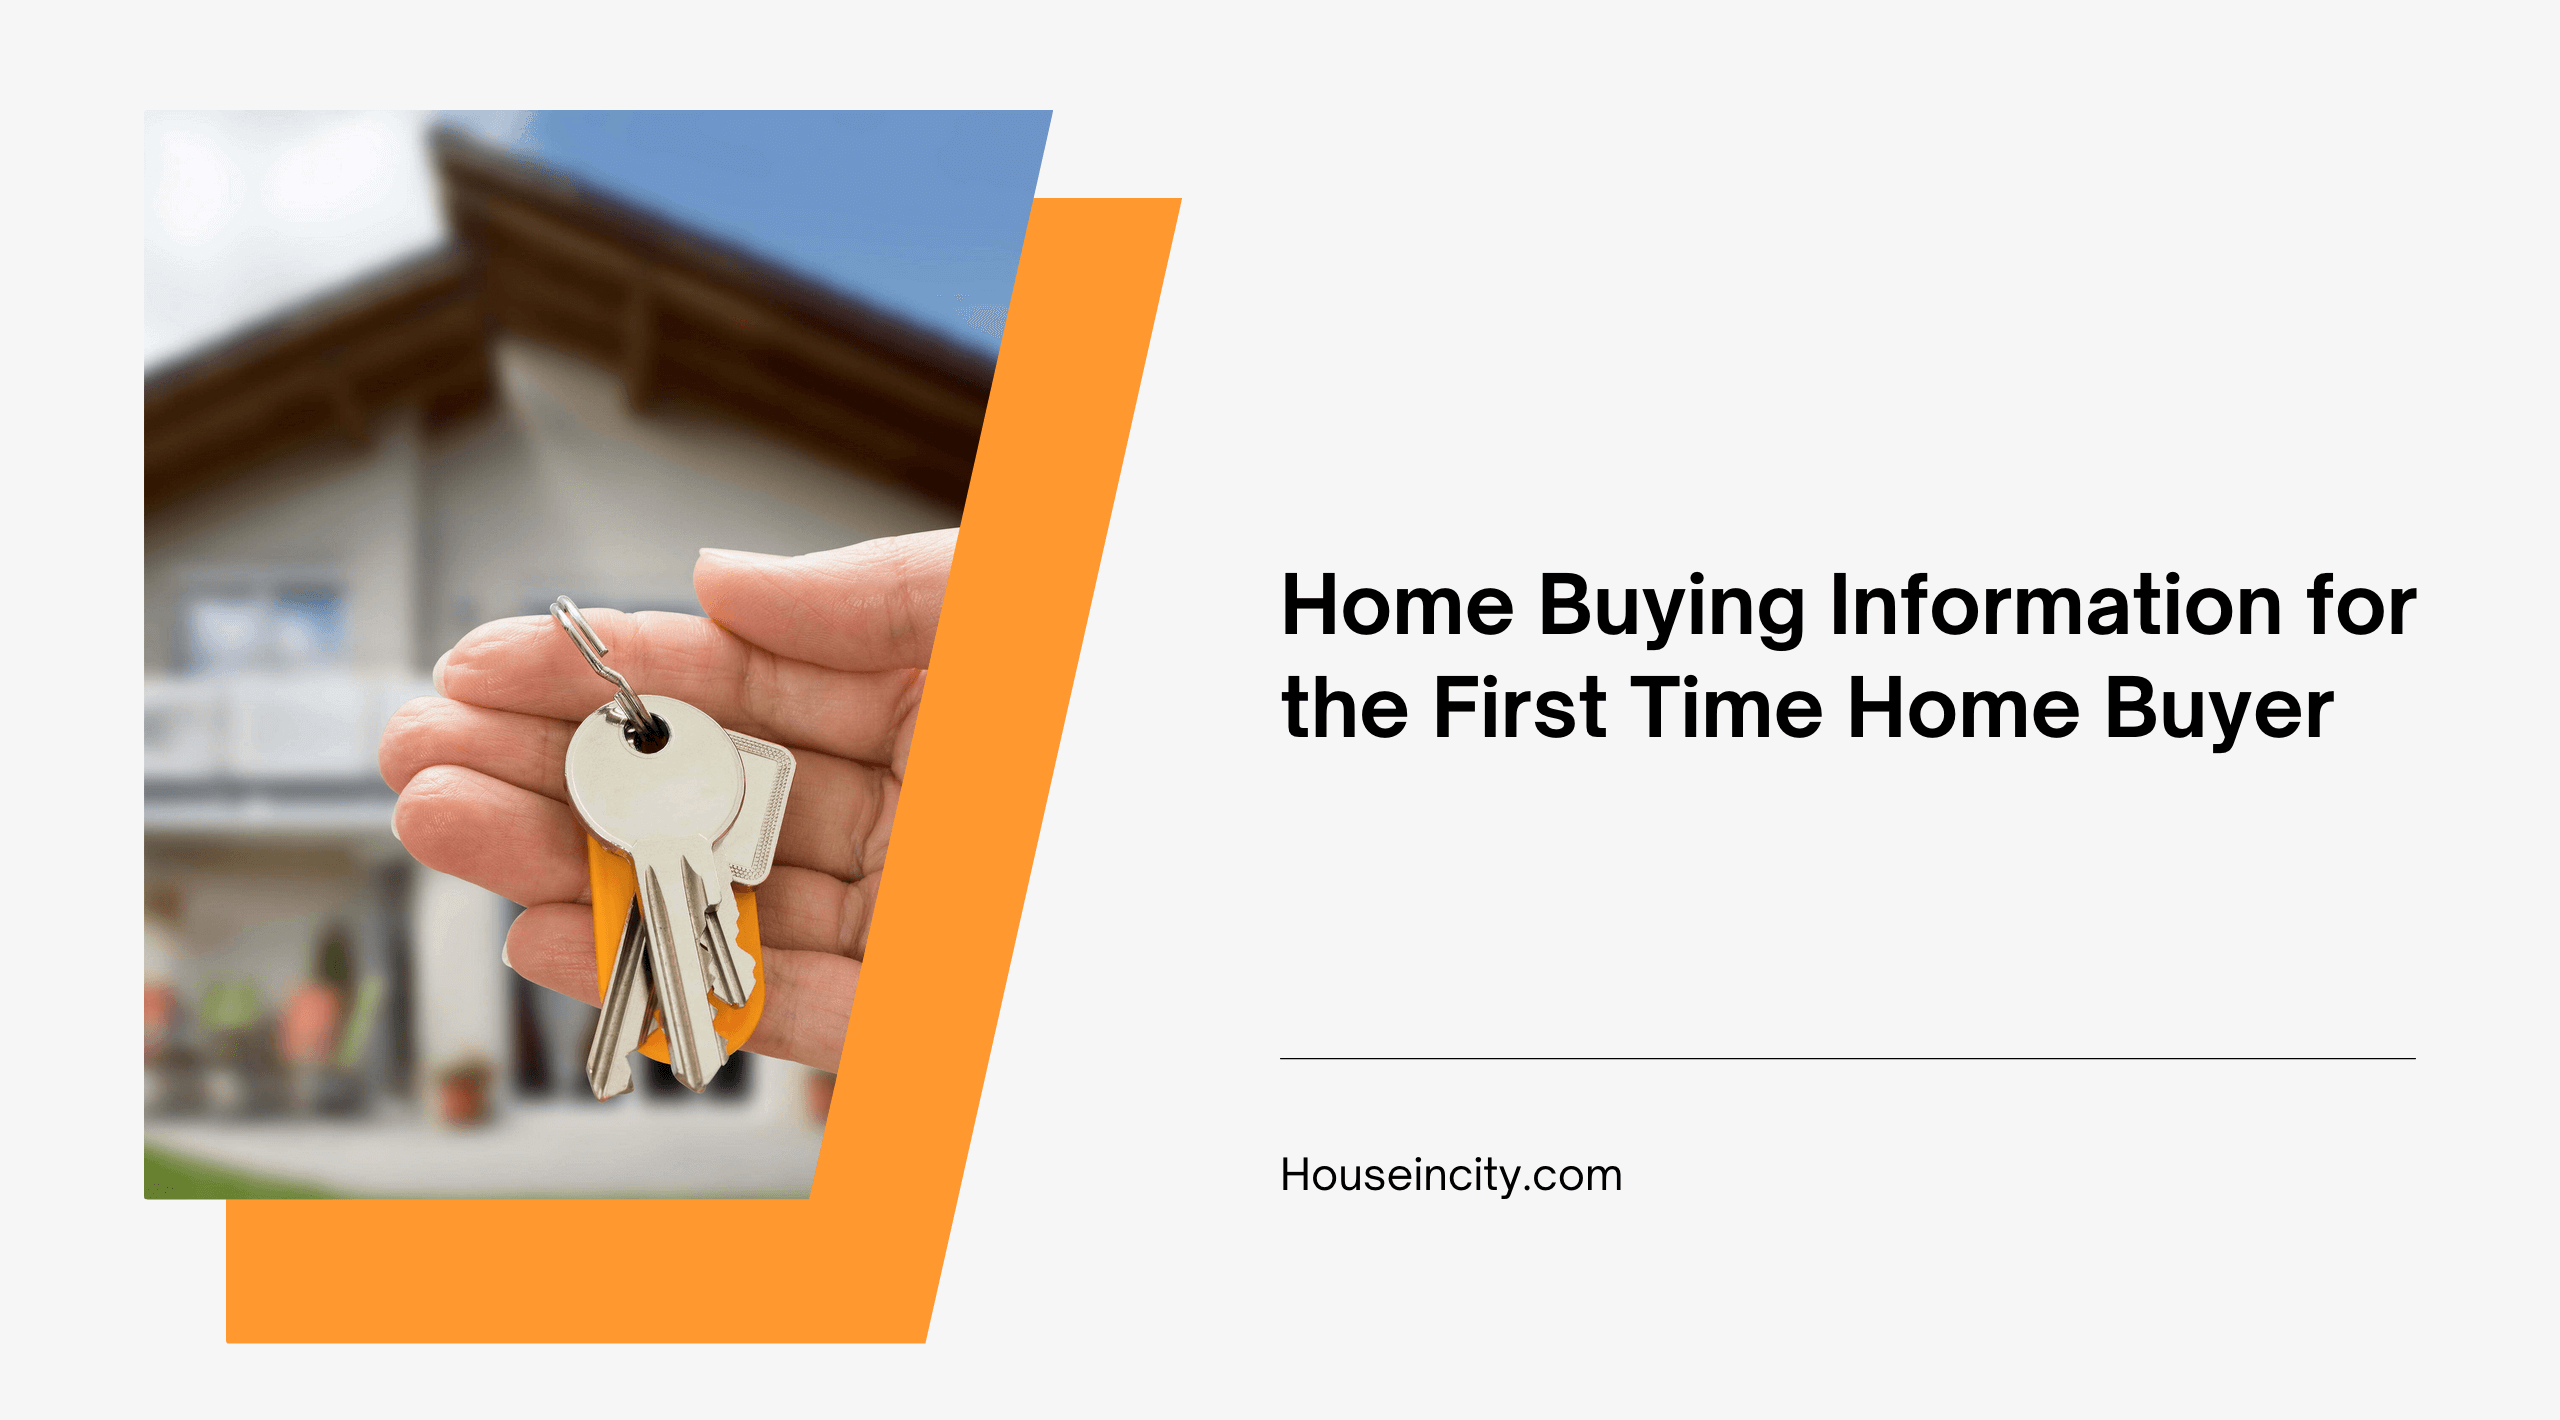 Home Buying Information for the First Time Home Buyer